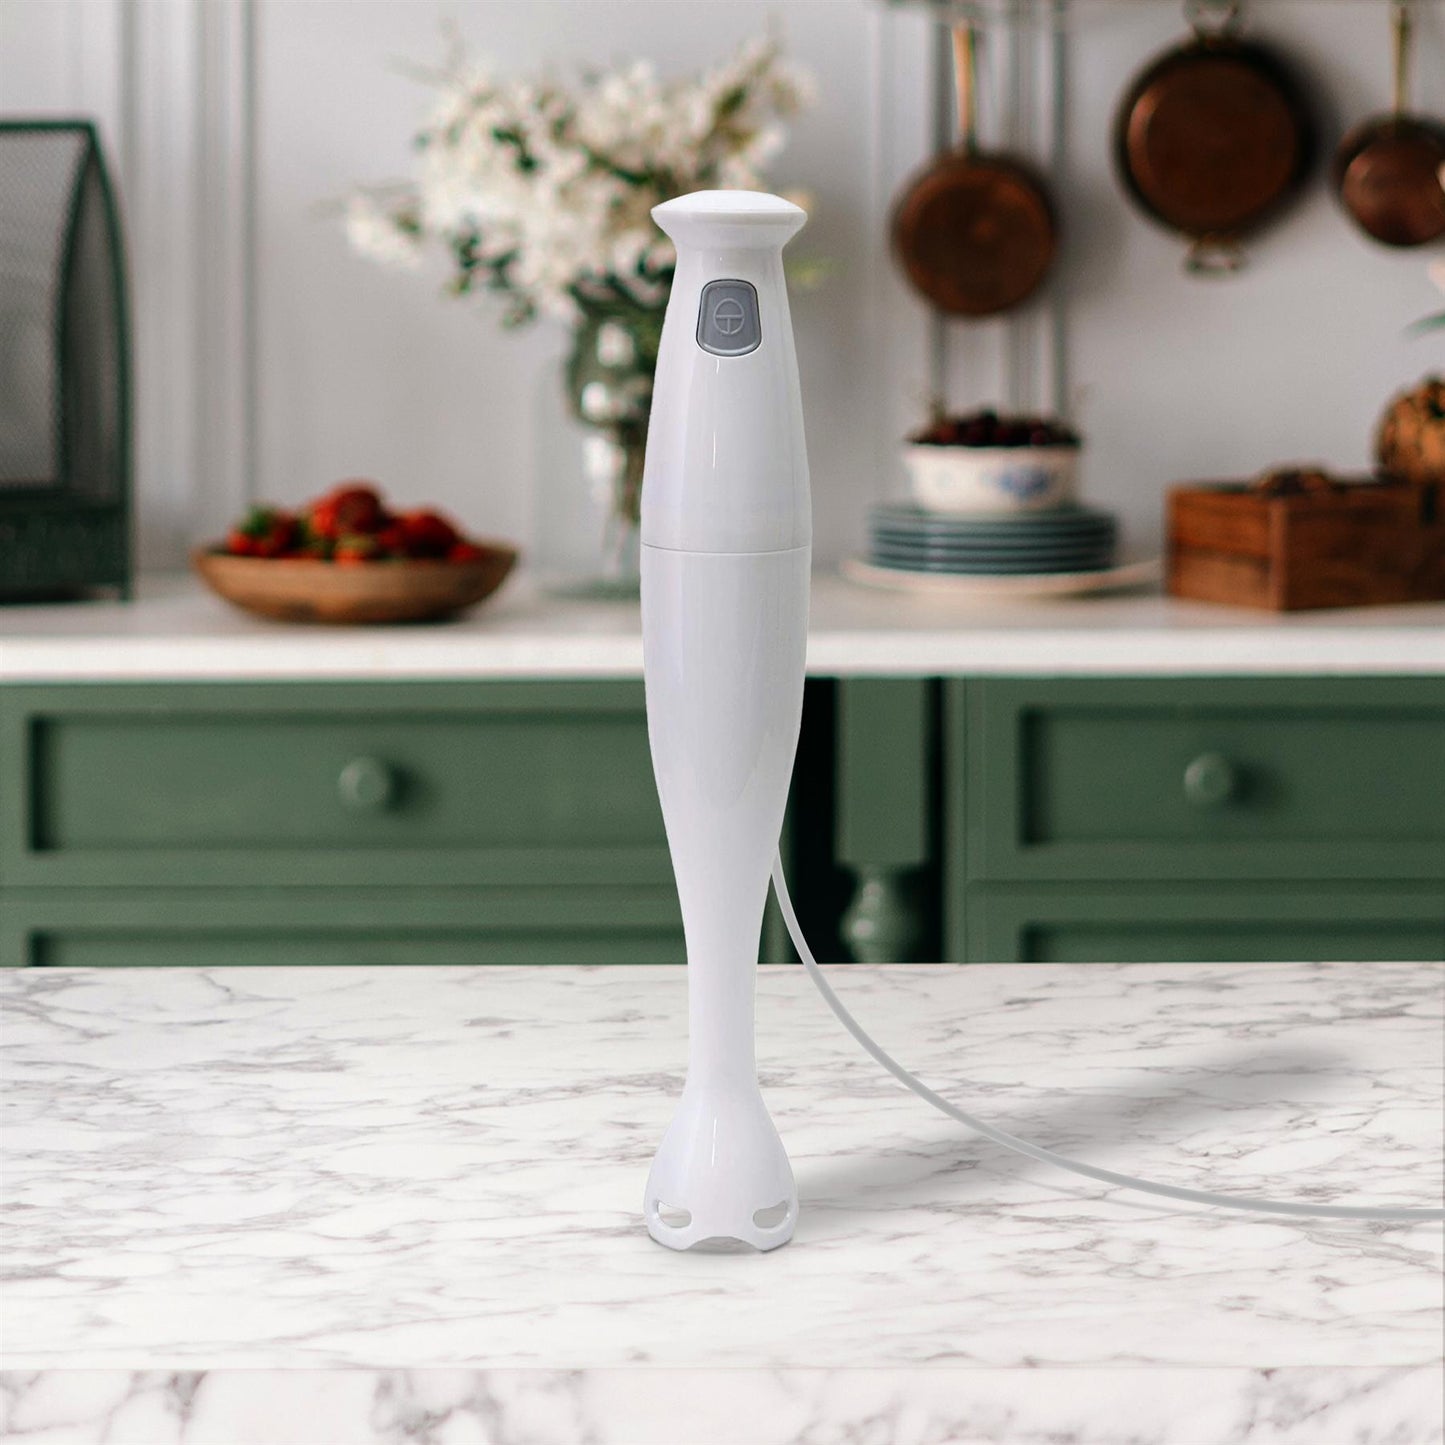 Versatile And Powerful Hand Blender With Two Stainless Steel Blades